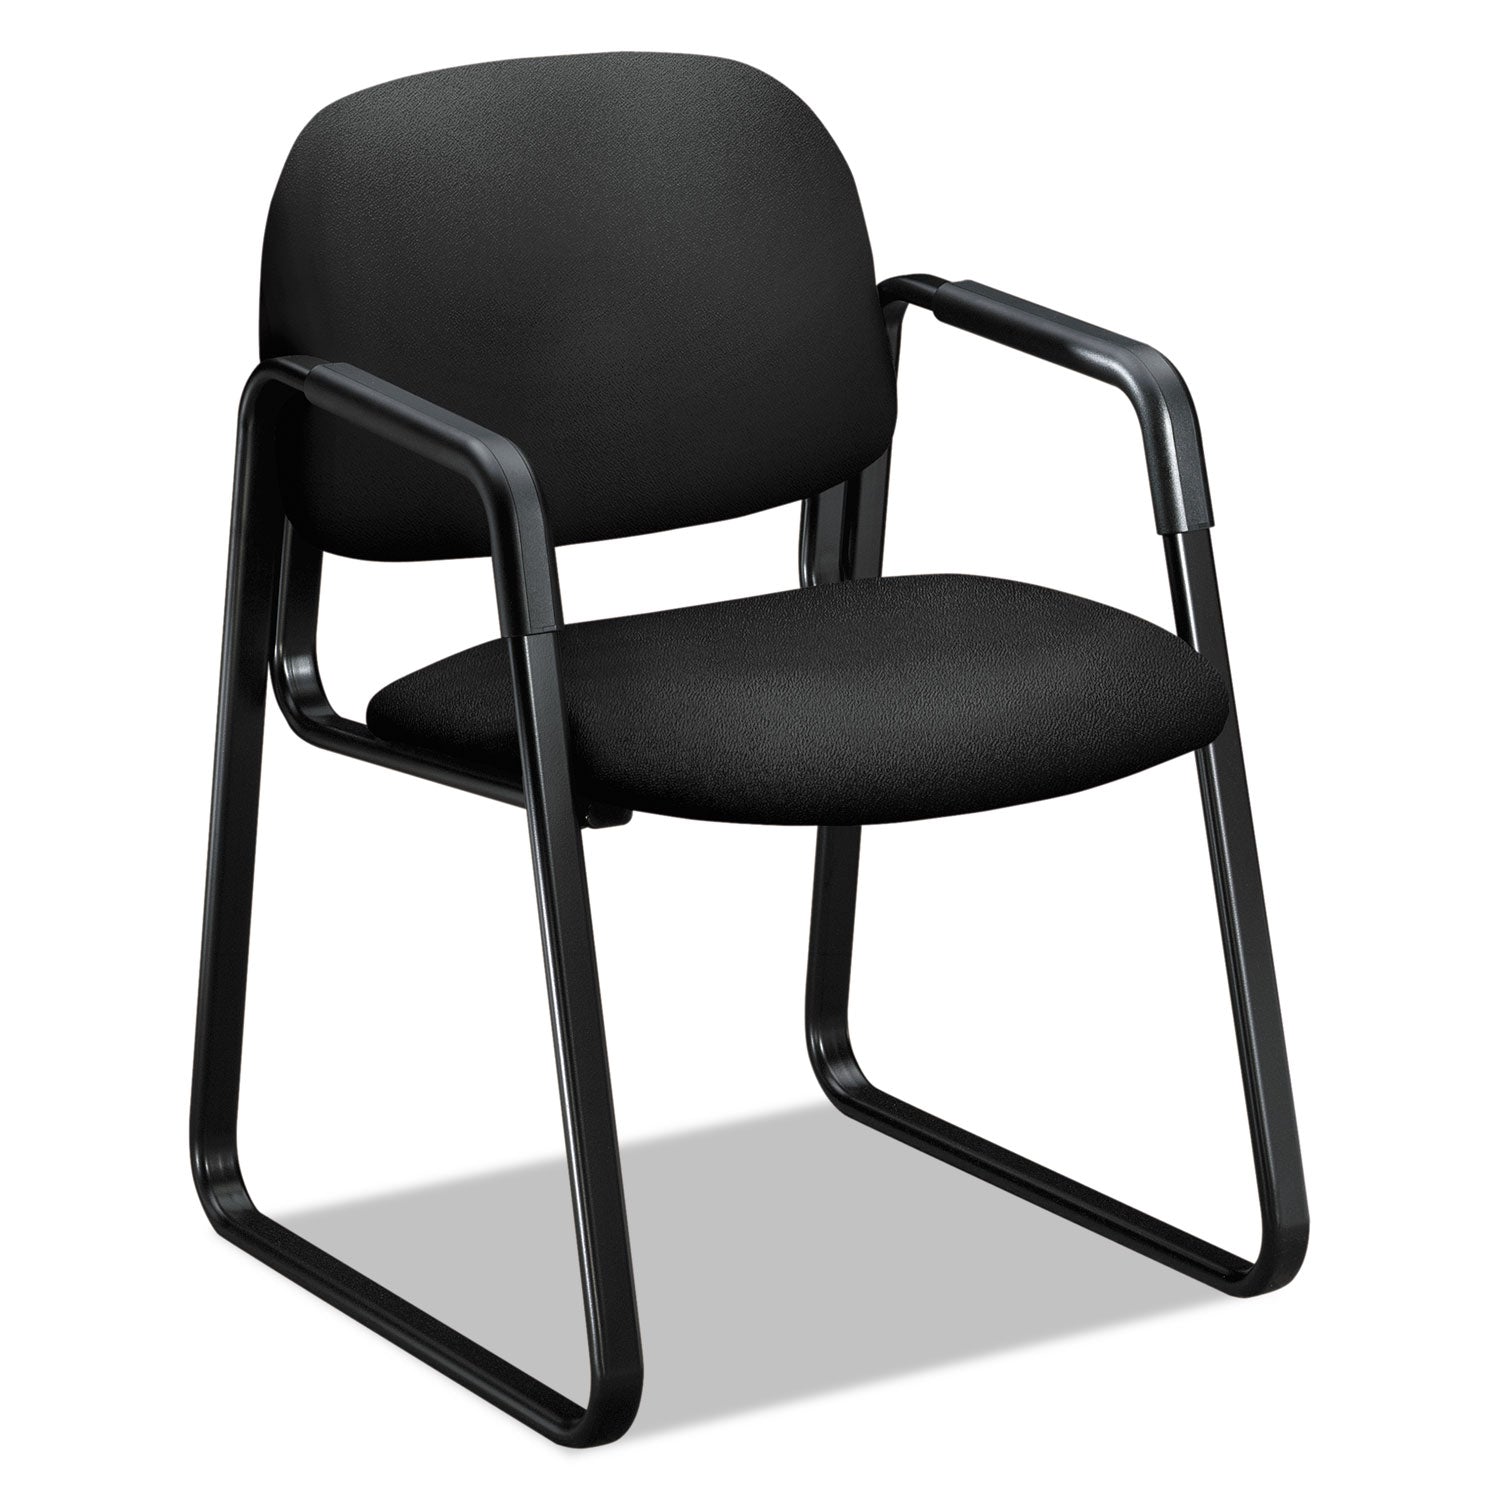 solutions-seating-4000-series-sled-base-guest-chair-fabric-upholstery-235-x-26-x-33-black-seat-back-black-base_hon4008cu10t - 1